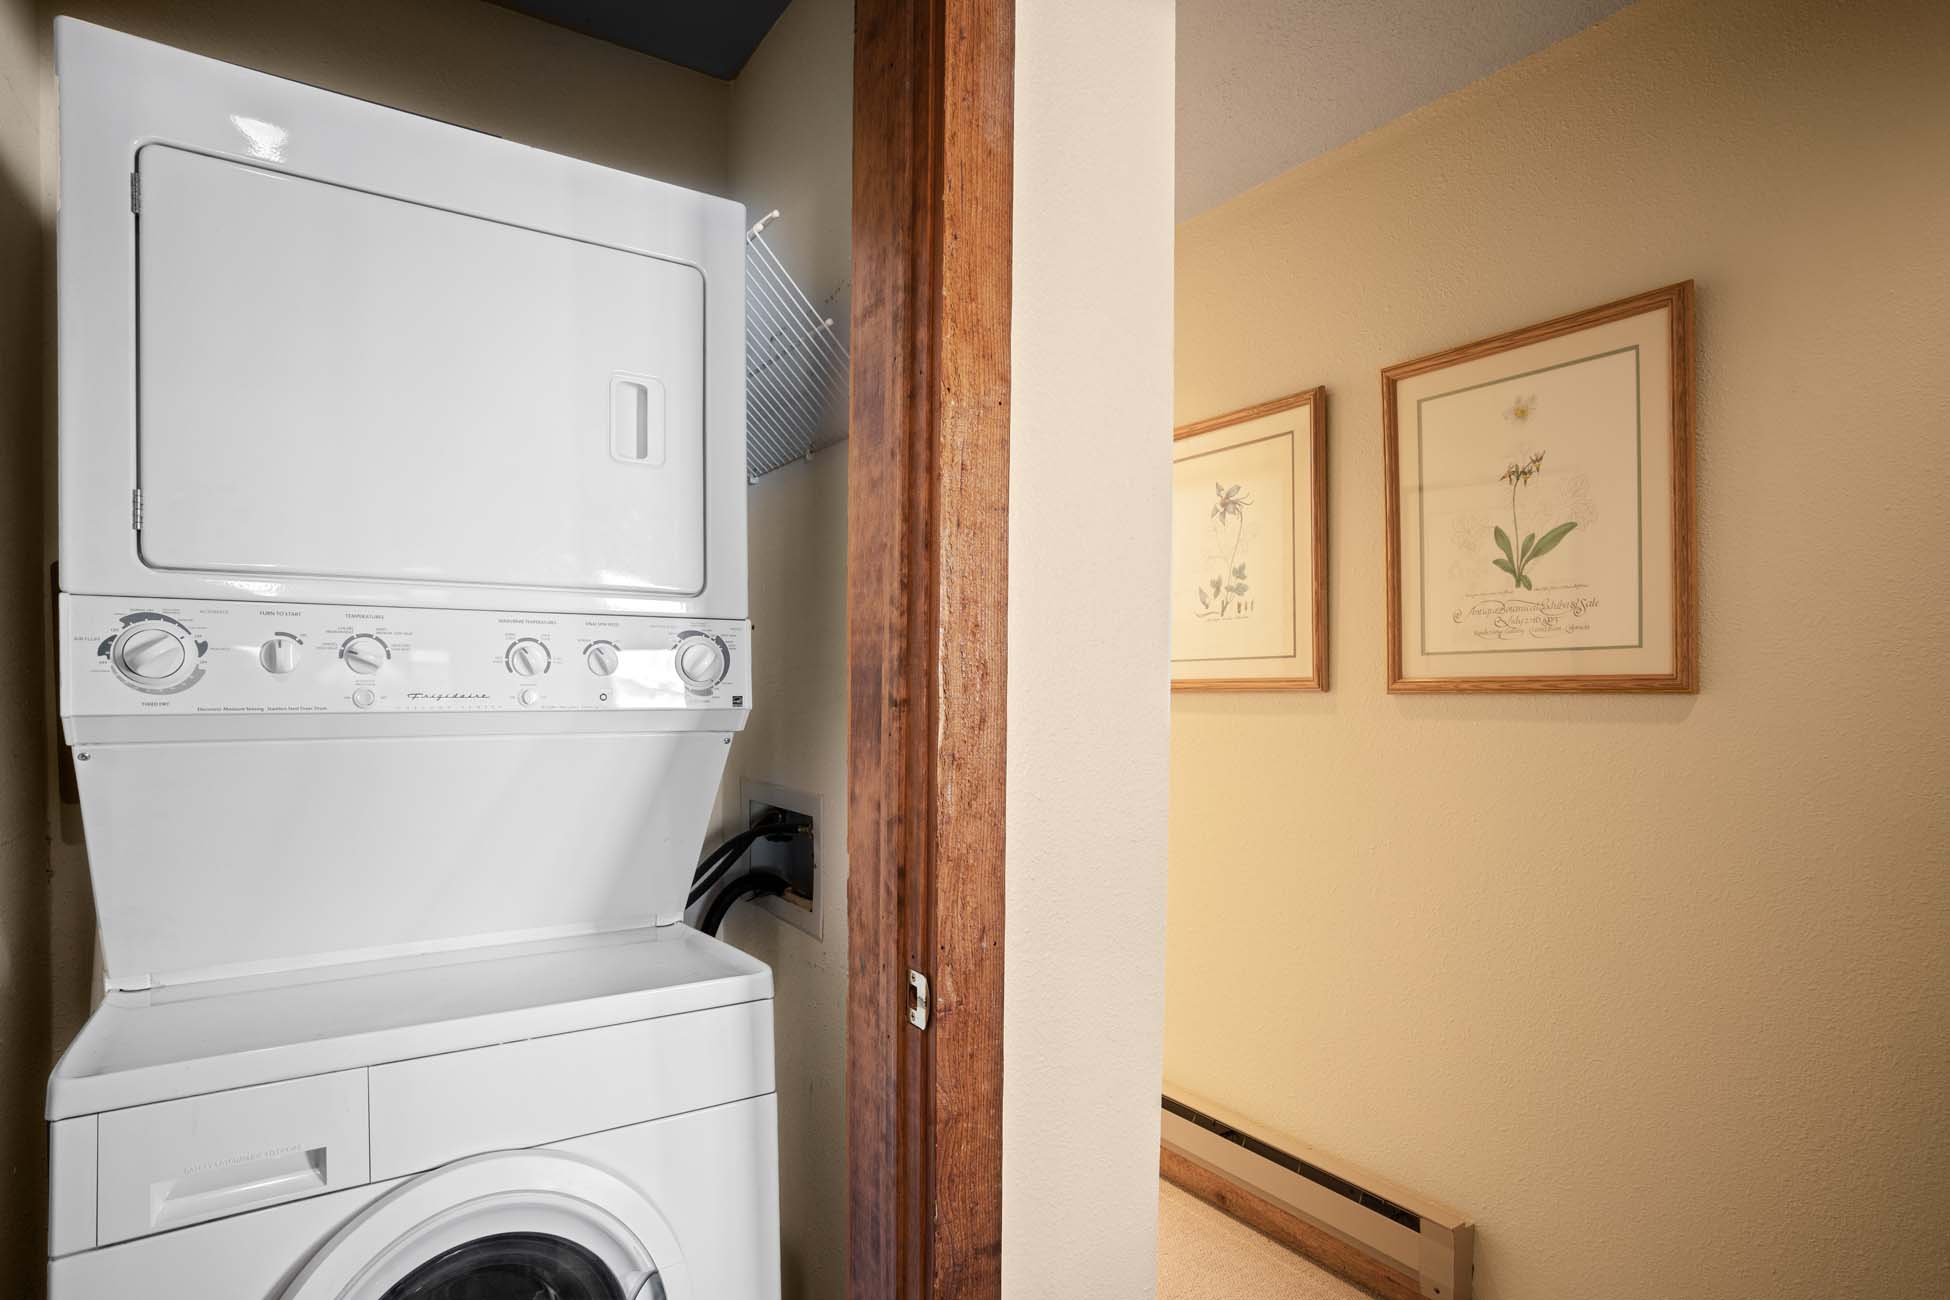 49 Powderview Drive, Crested Butte Colorado - laundry room